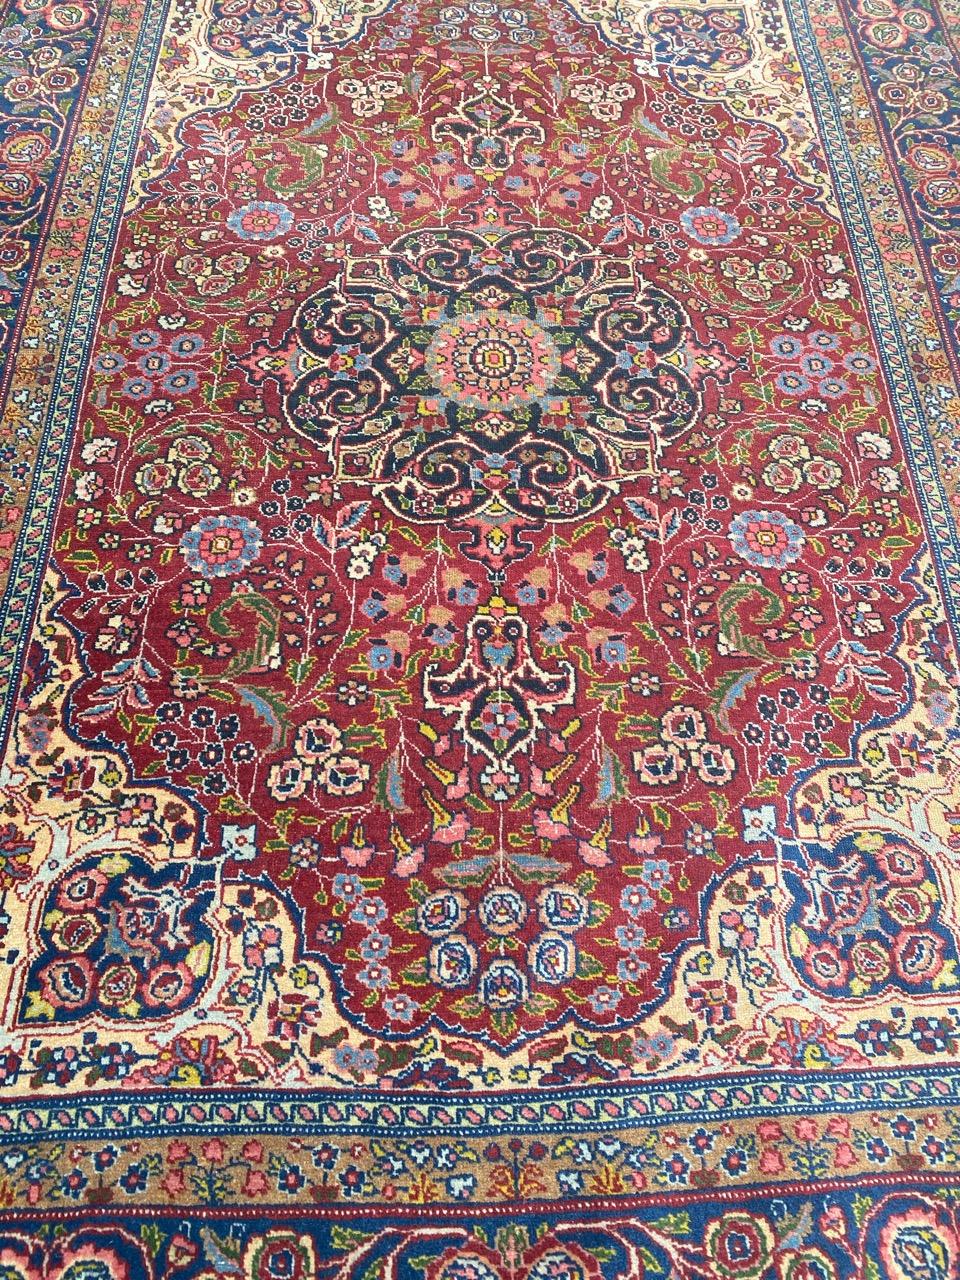 Very pretty late 19th century Tabriz rug with beautiful floral central medallion design and beautiful natural colors, entirely and finely hand knotted with wool velvet on cotton foundation.

✨✨✨
